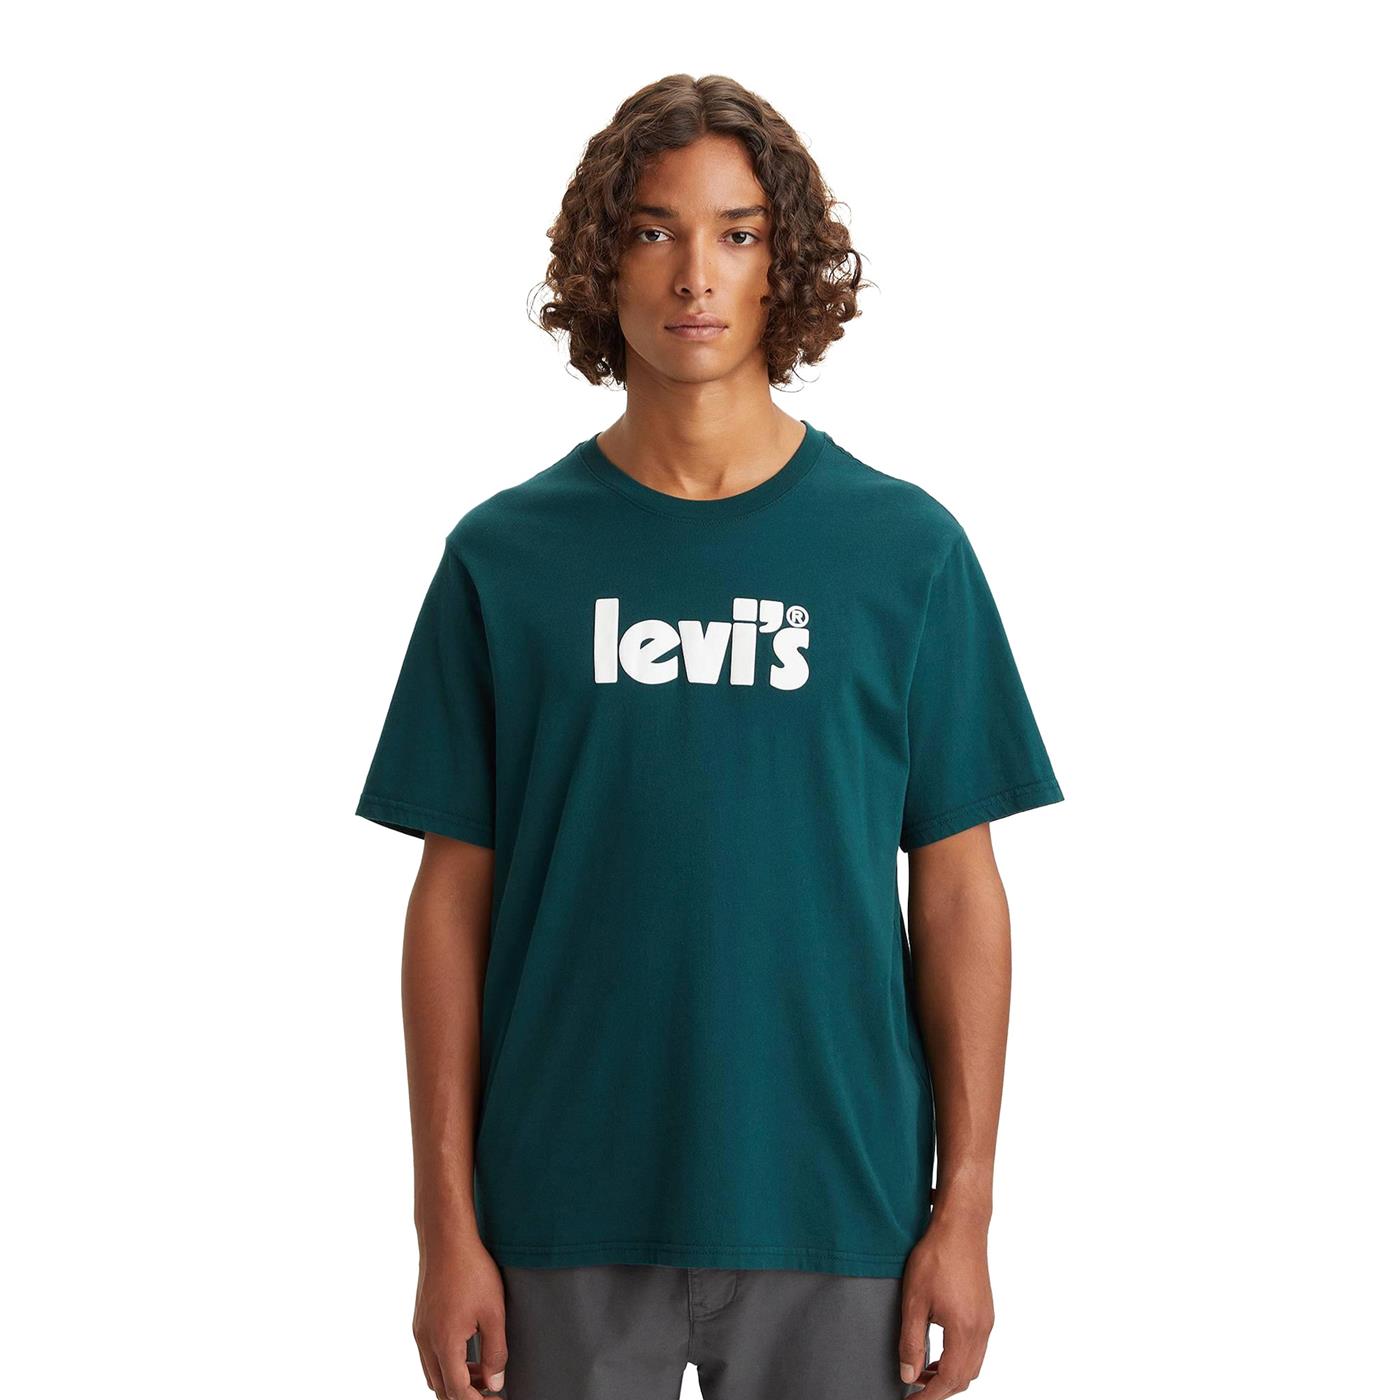 The Champion® Kids Classic Script Cvc Crew sweatshirt is the iconic  sweatshirt that started it all | 16143 - T - 0145 | CamaragrancanariaShops  - Shirt Levis SS Relaxed Fit Tee Core Poster Green for Man